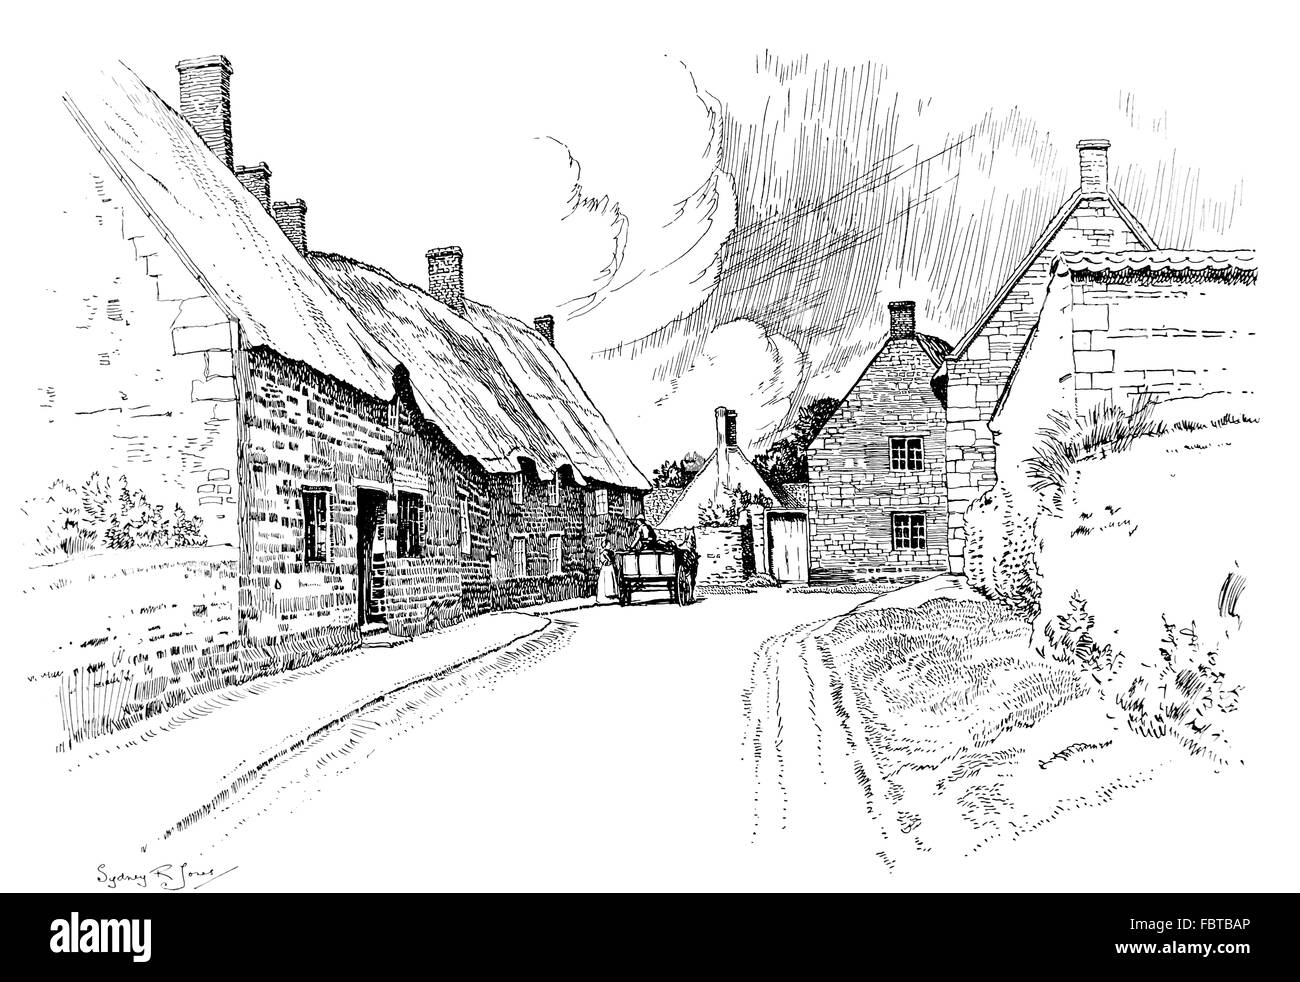 UK, England, Northamptonshire, Wilbarston, thatched cottages beside road through village in 1911, line illustration Stock Photo